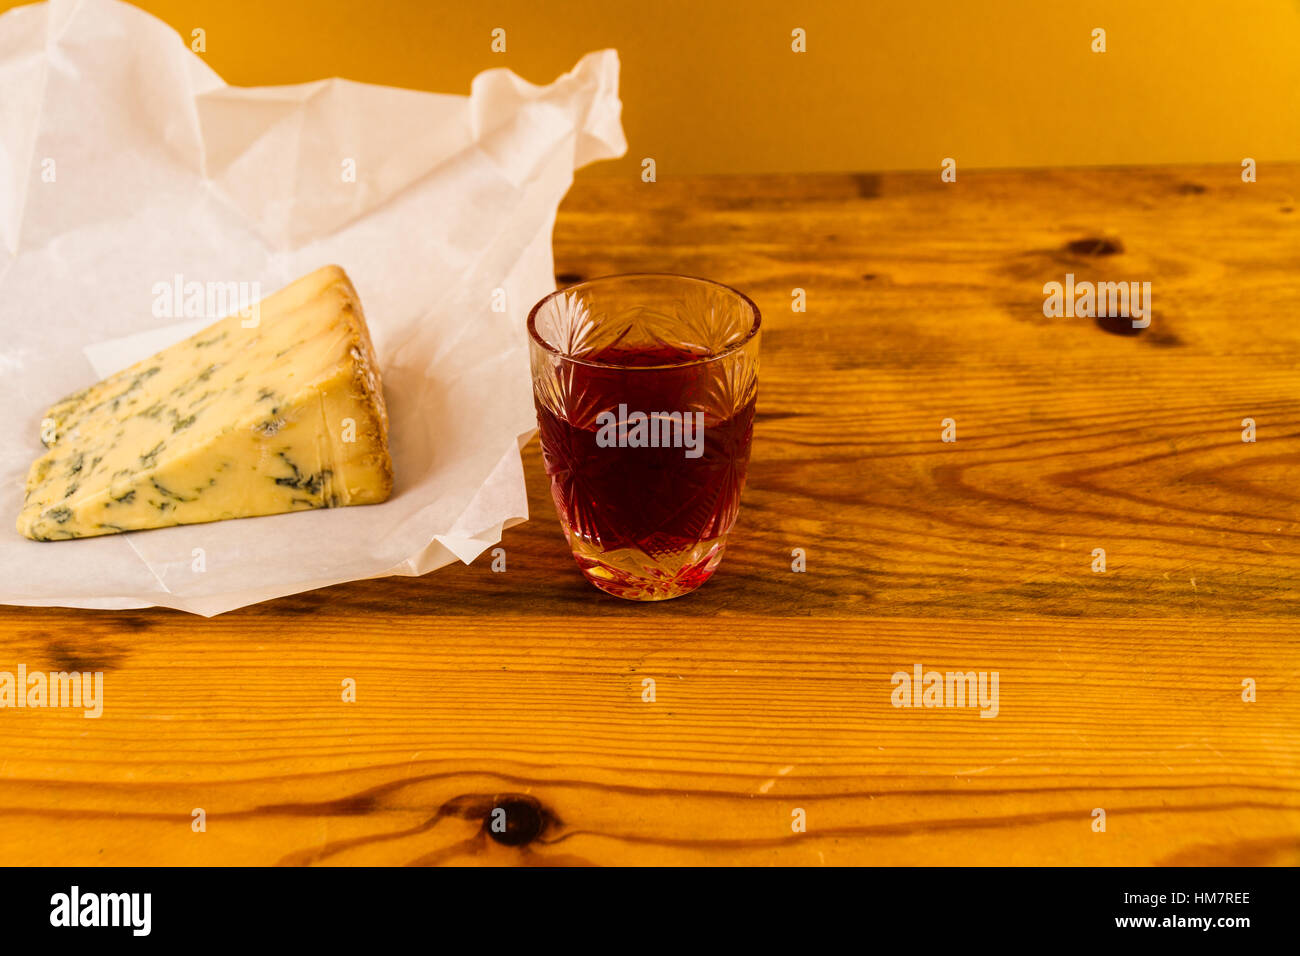 Shot glass with slow gin, beside a wedge of stilton cheese unwrapped greaseproof paper. Stock Photo